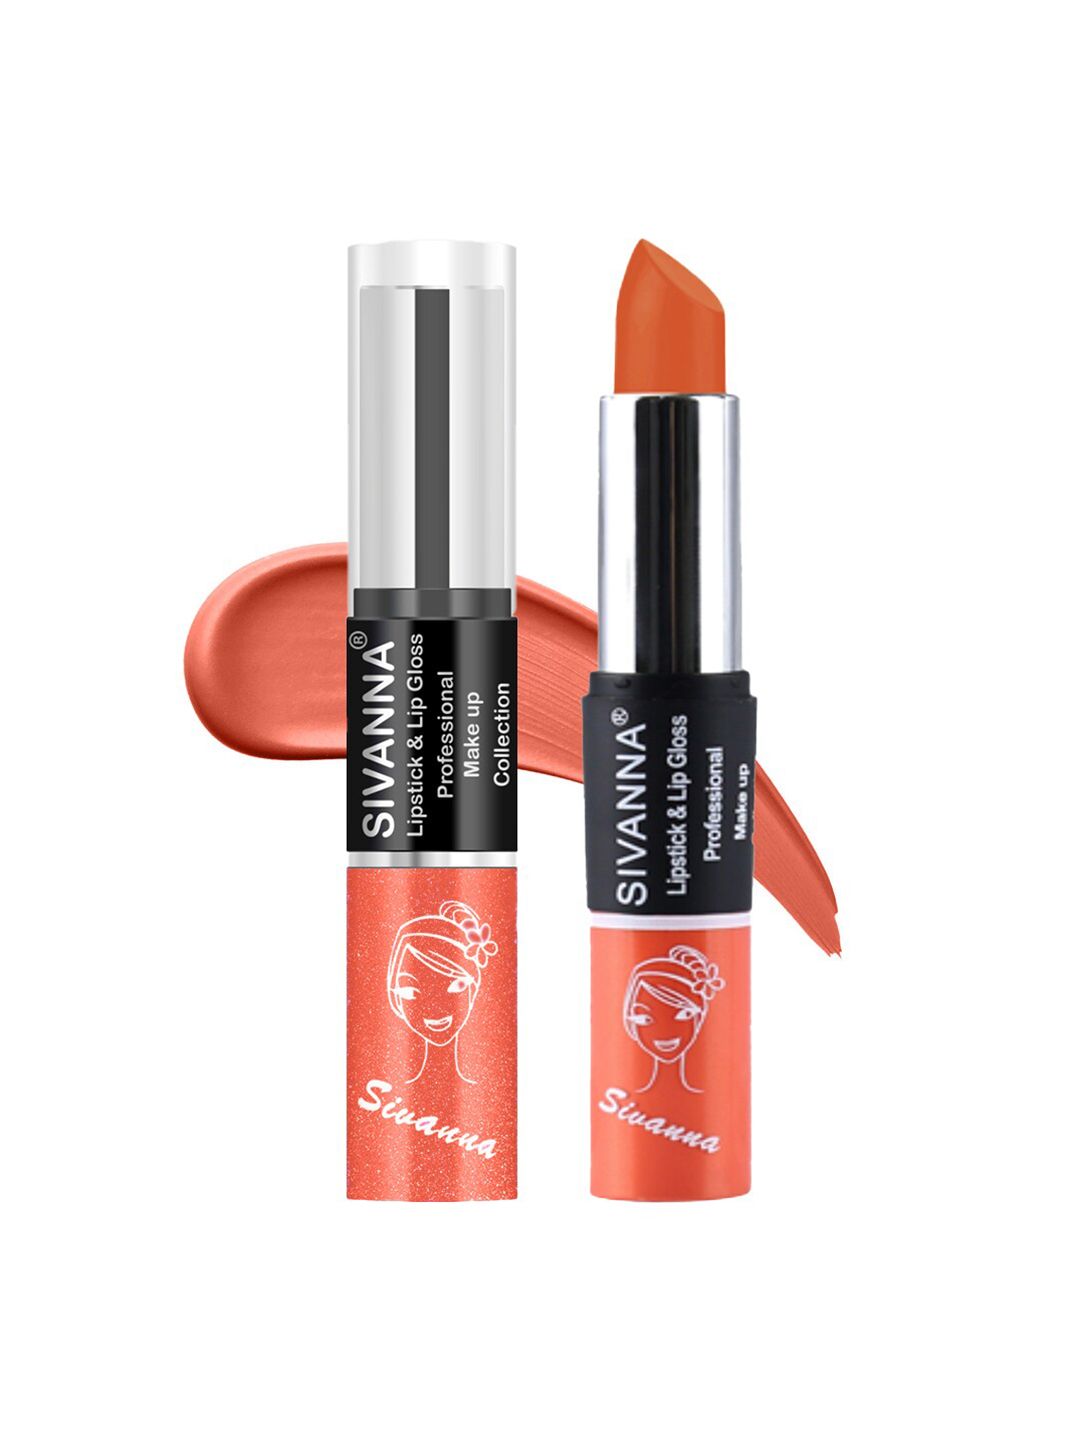 Sivanna Colors Professional Makeup Collection 2 in 1 Lipstick & Lip Gloss - DK061 17 Price in India